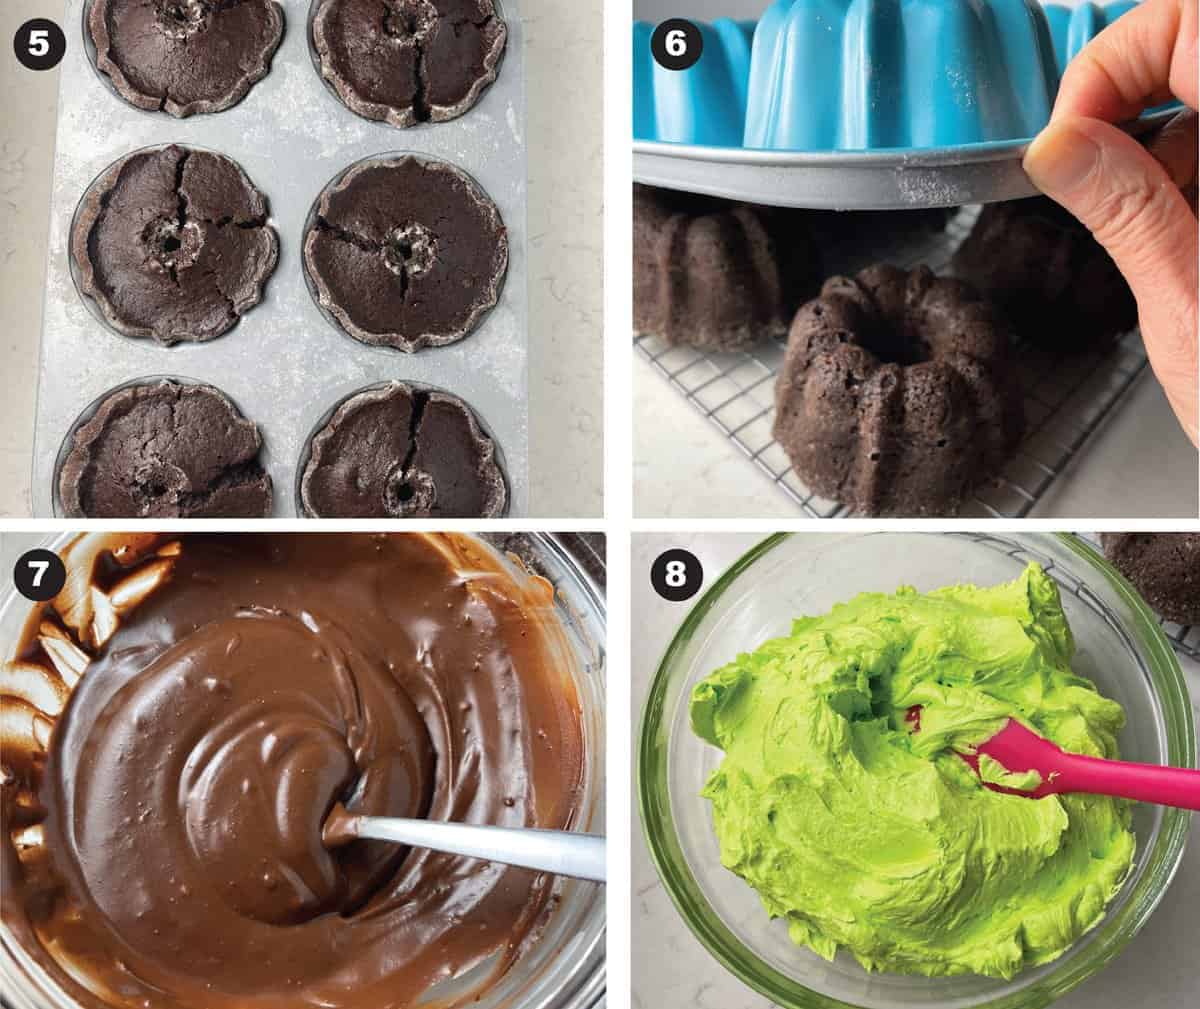 Shows 4 photo steps. Baked mini Bundts in the pan, inverting pan on cooling rackt, bowl of chocolate ganache and another bowl of green buttercream with spoon.